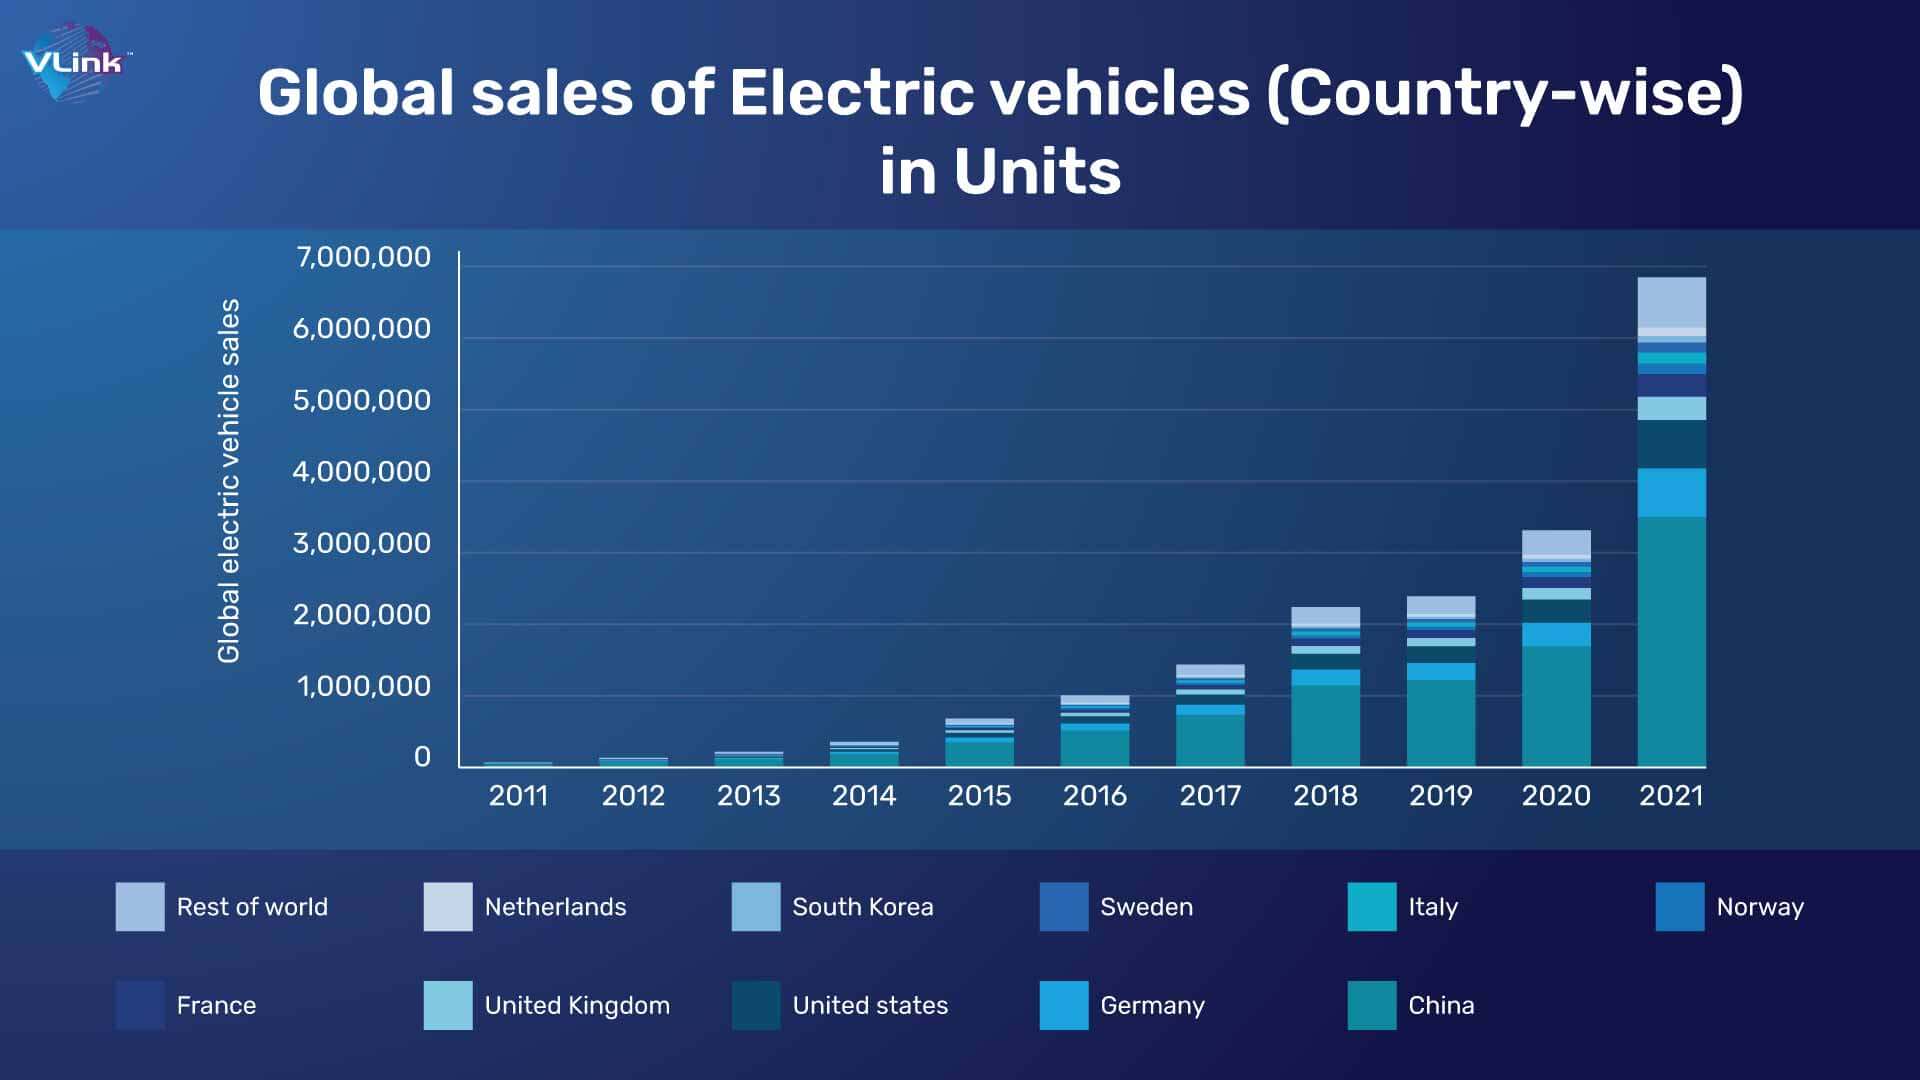 Global sales of Electric vehicles (Country-wise) in Units